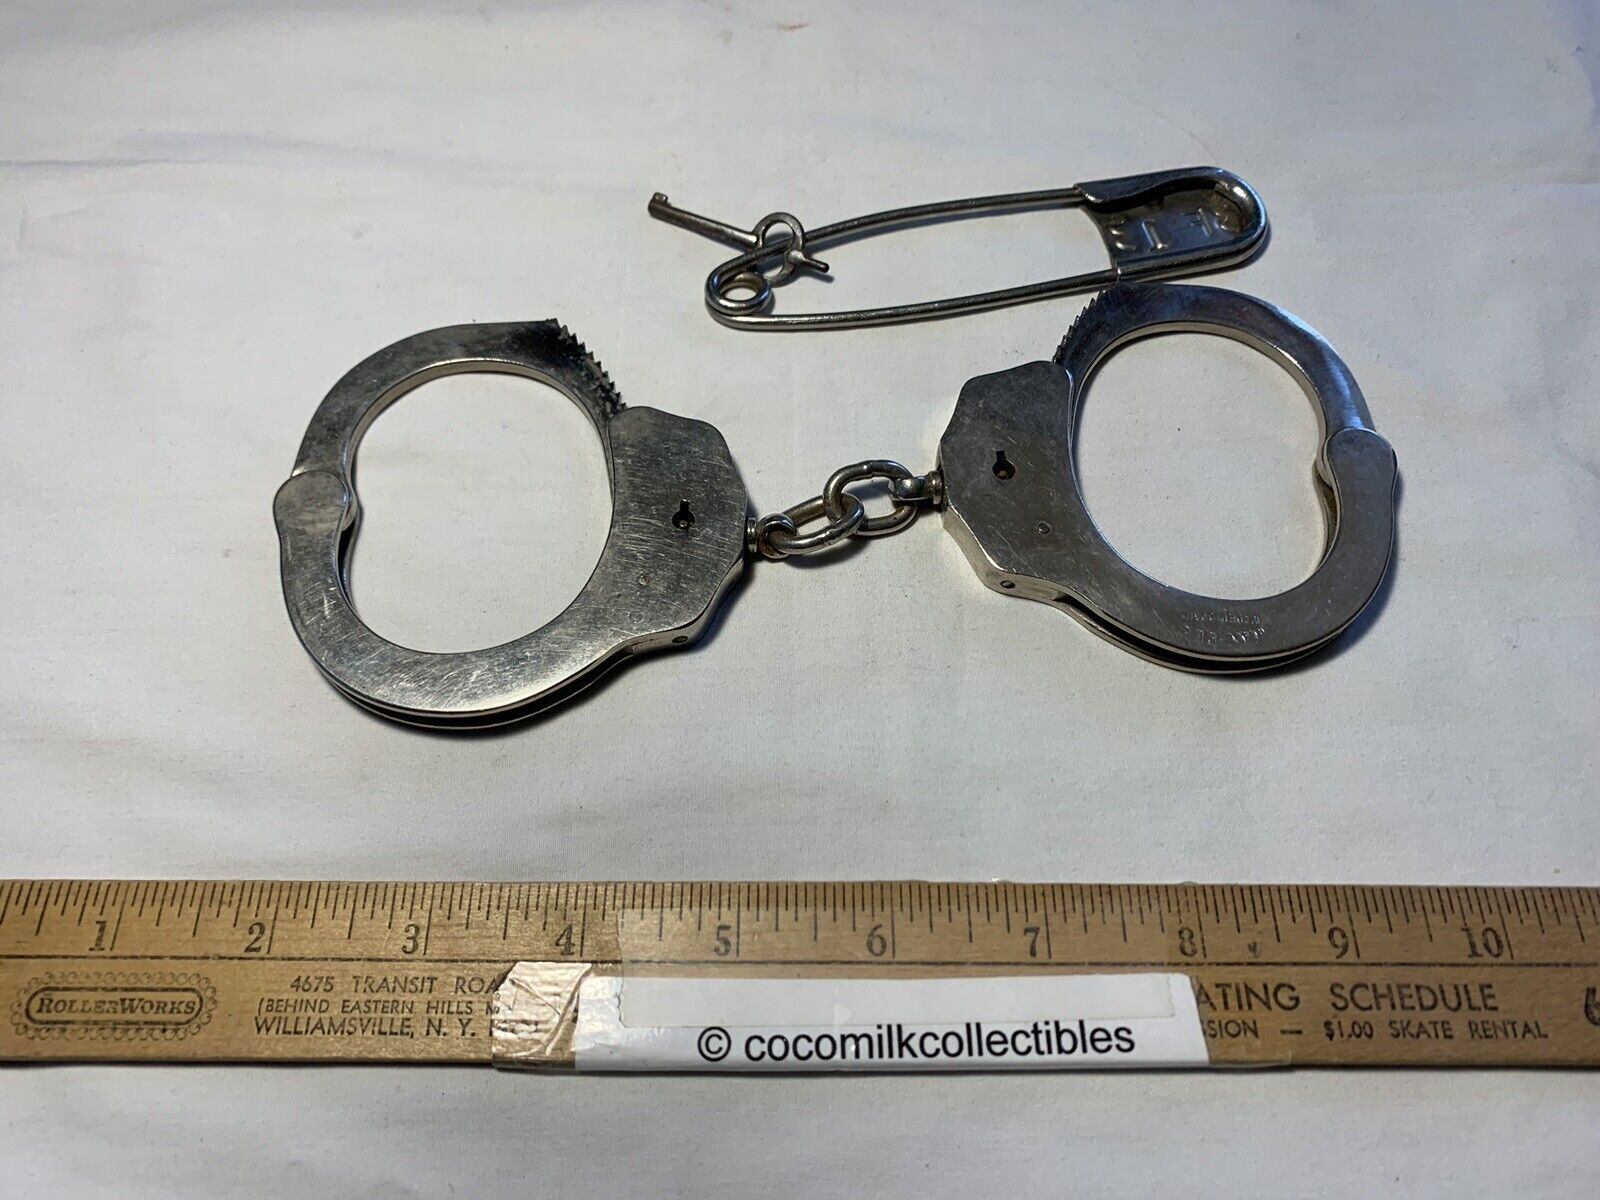 Vintage Handcuffs Jay-Pee with Key Made in Spain Heavy Duty Police Security